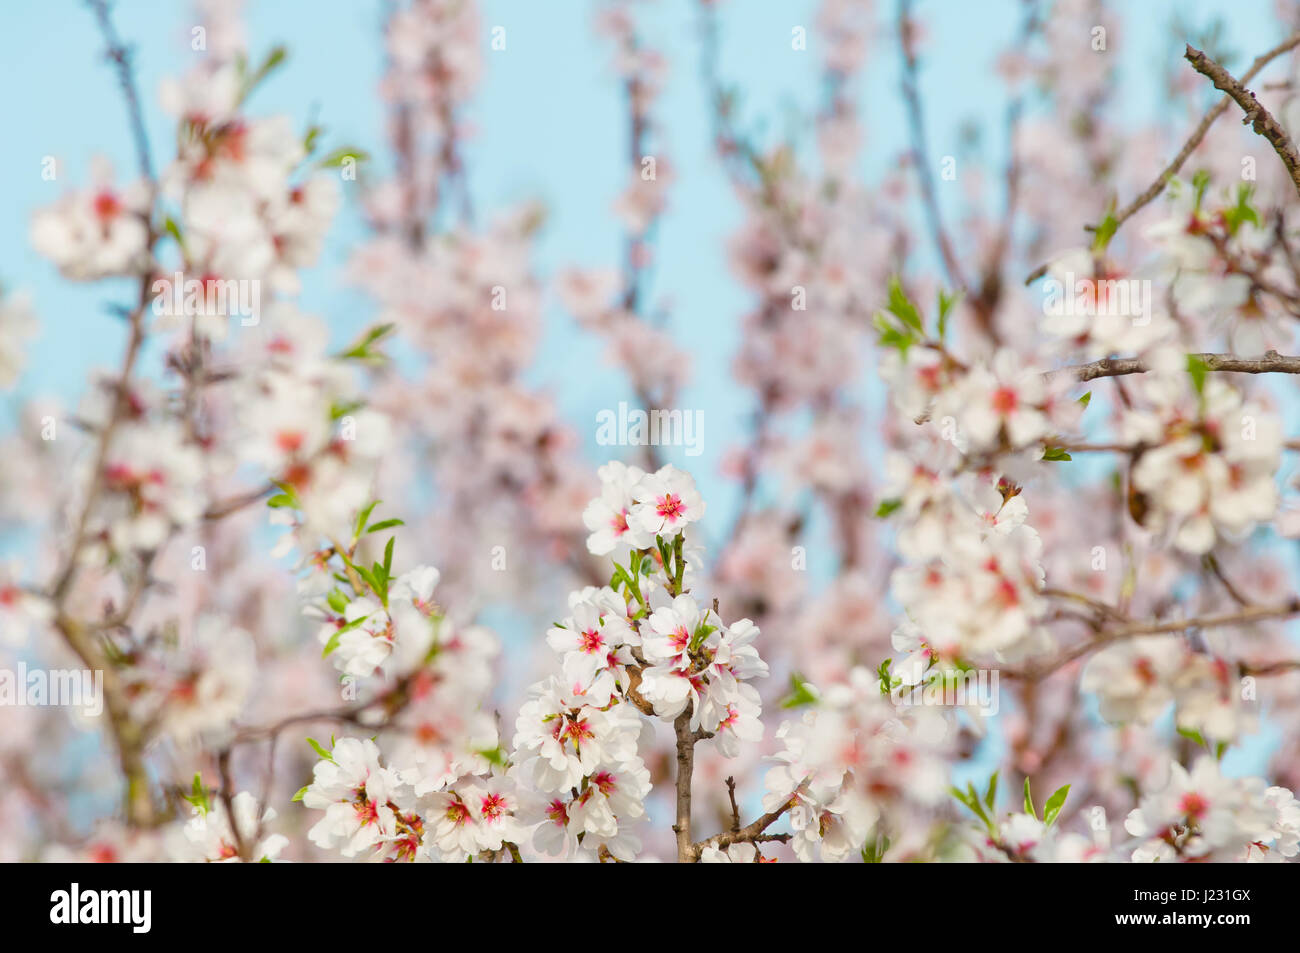 Almond blossom, full bloom, blooming almond tree in March Stock Photo